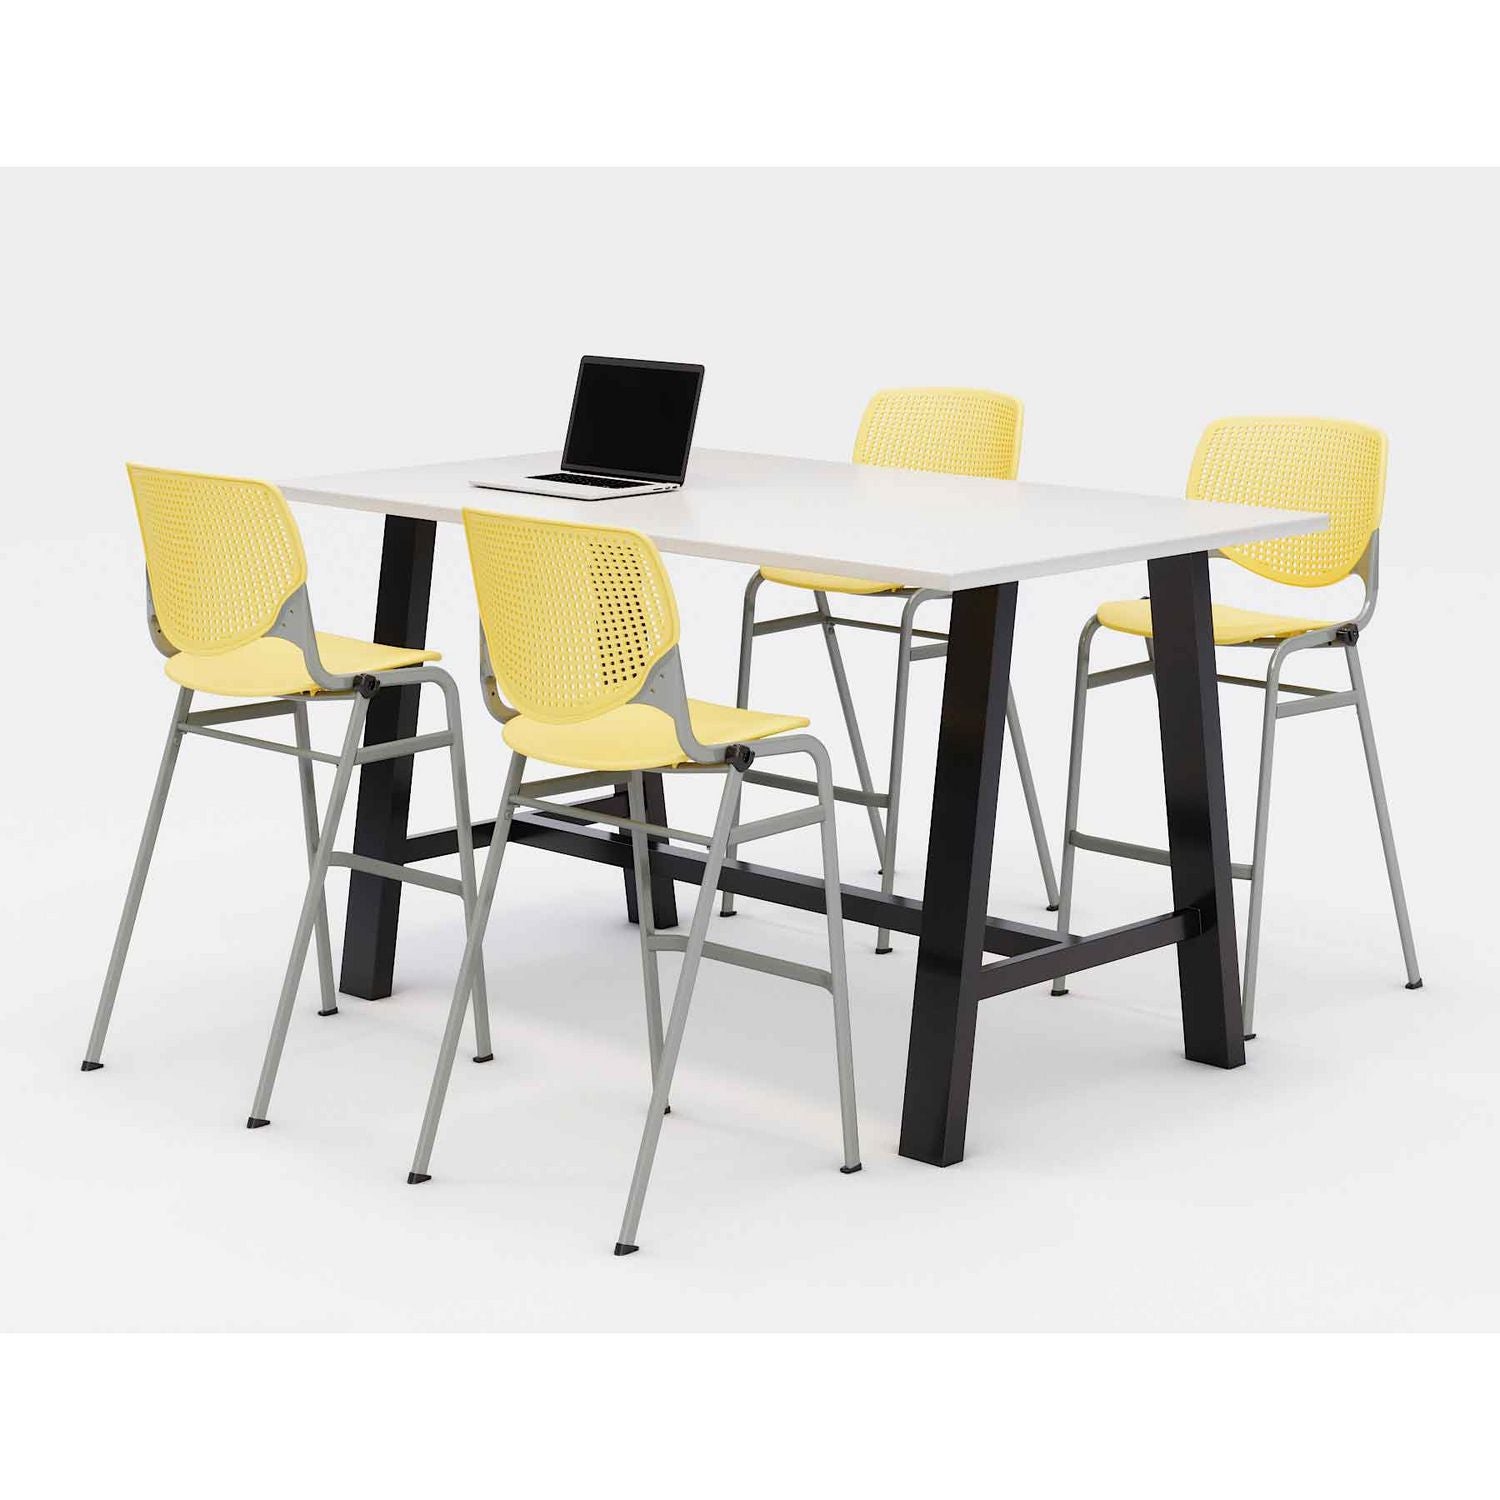 midtown-bistro-dining-table-with-four-yellow-kool-barstools-36-x-72-x-41-designer-white-ships-in-4-6-business-days_kfi840031900586 - 1